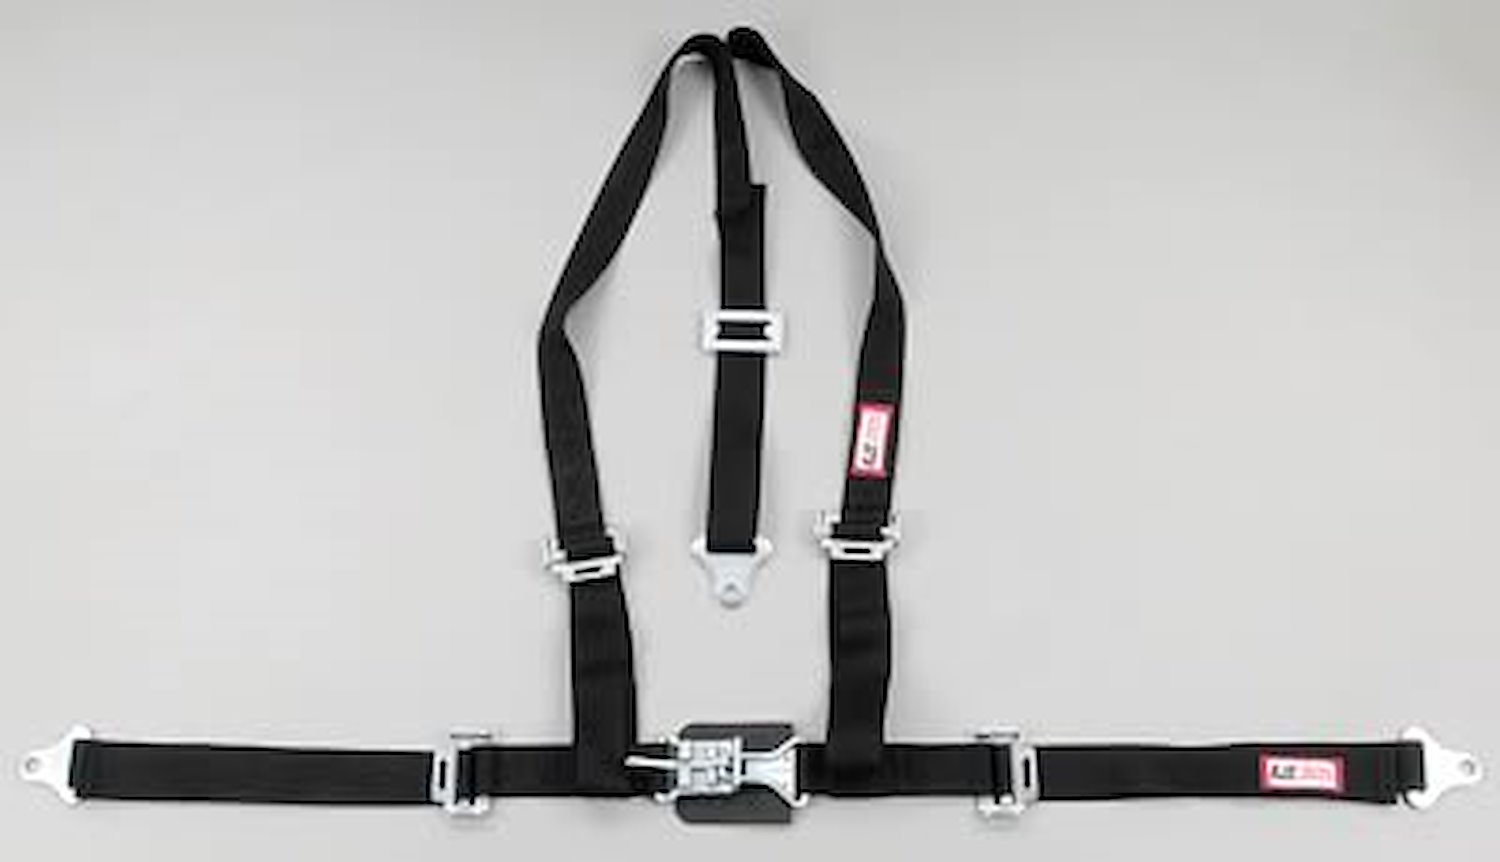 NON-SFI L&L HARNESS 3 PULL UP Lap Belt SEWN IN 2 S.H. Individual FLOOR Mount ALL WRAP ENDS BLUE